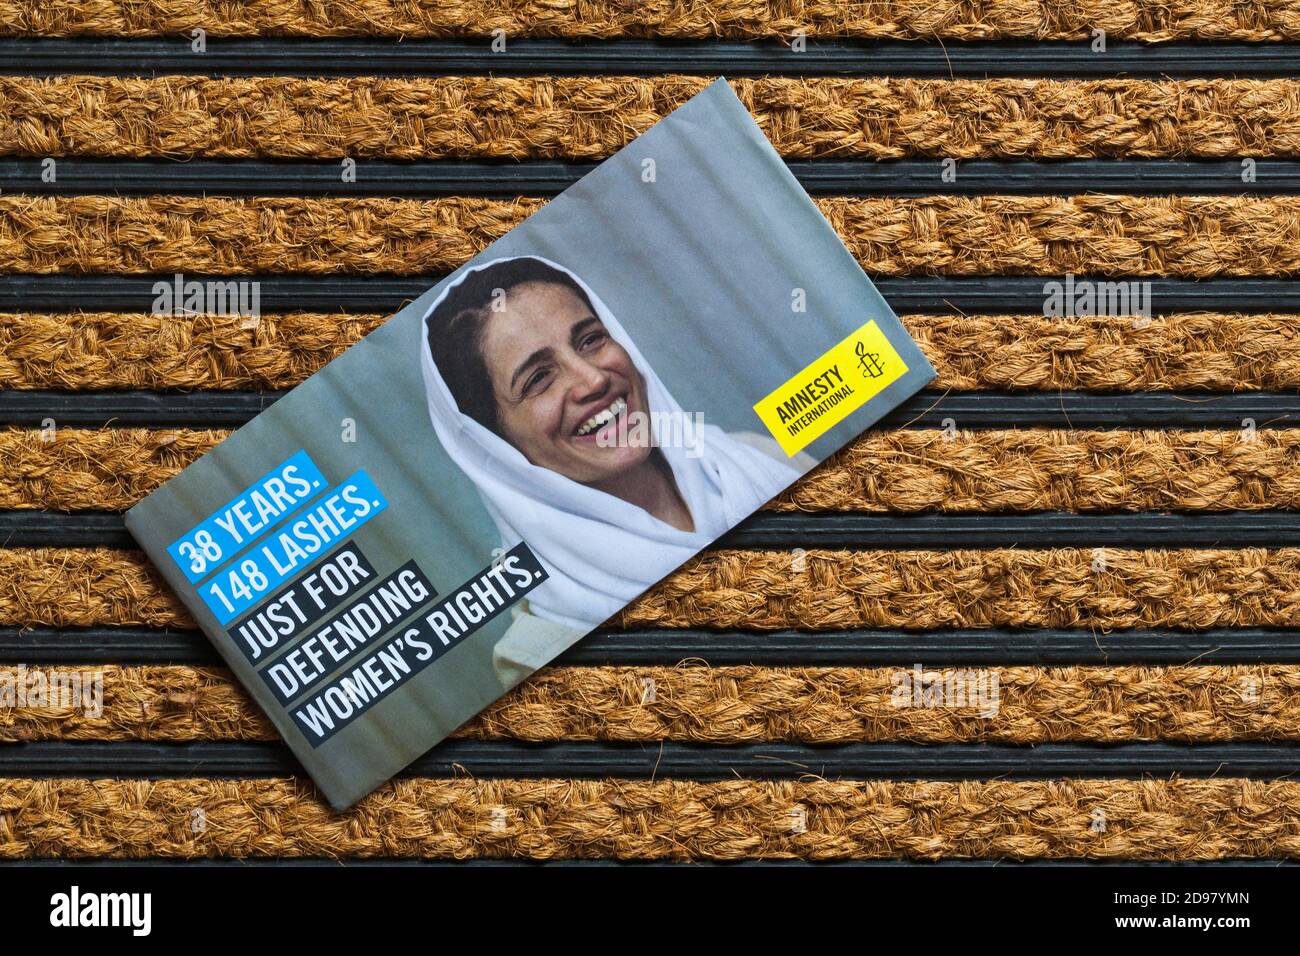 Post mail on doormat - charity appeal, Amnesty International 38 years 148 lashes just for defending women's rights Stock Photo